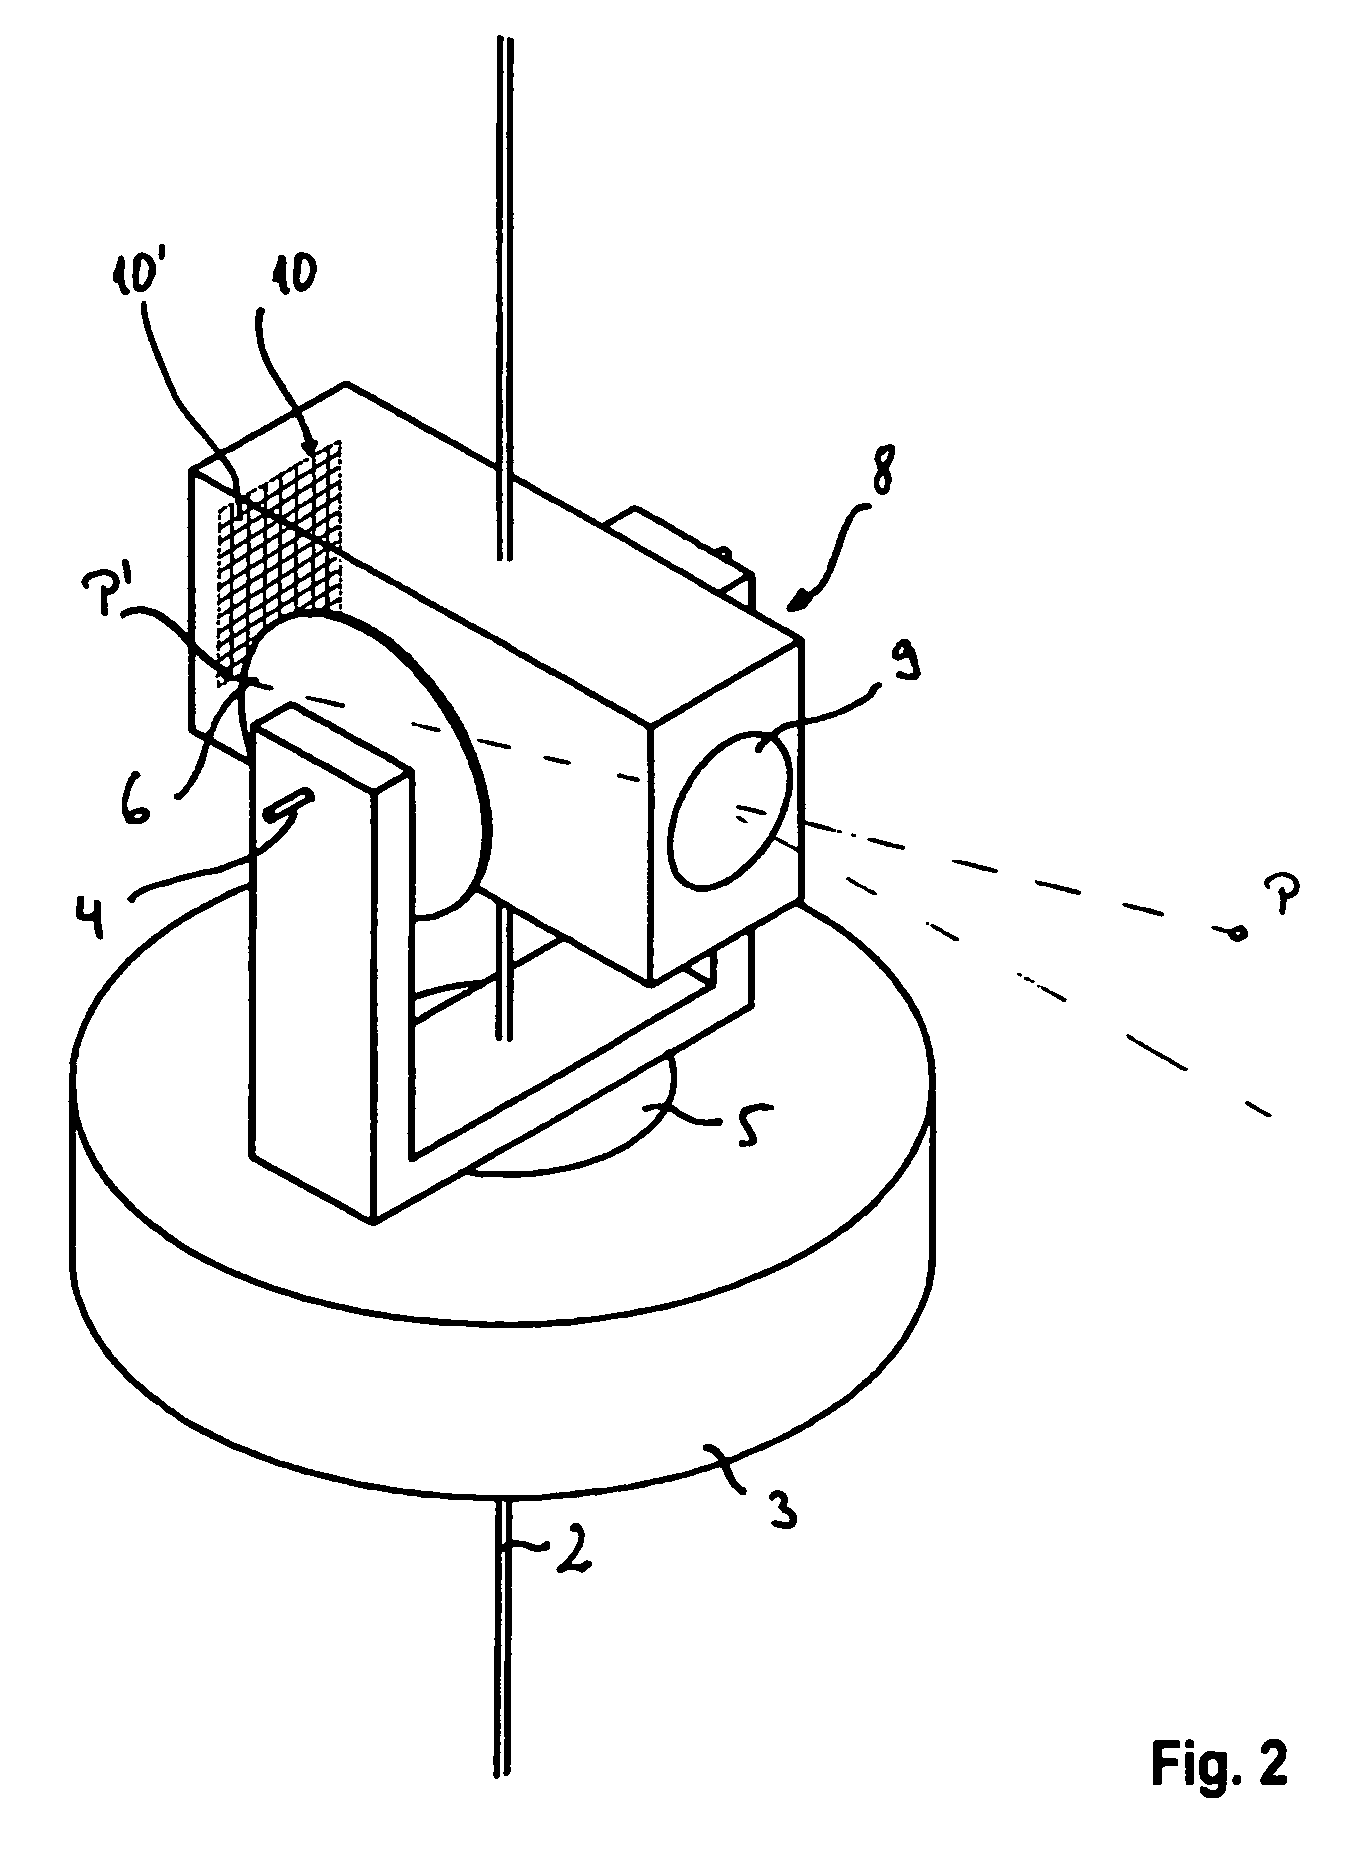 Surveying instrument and method of providing survey data of a target region using a surveying instrument